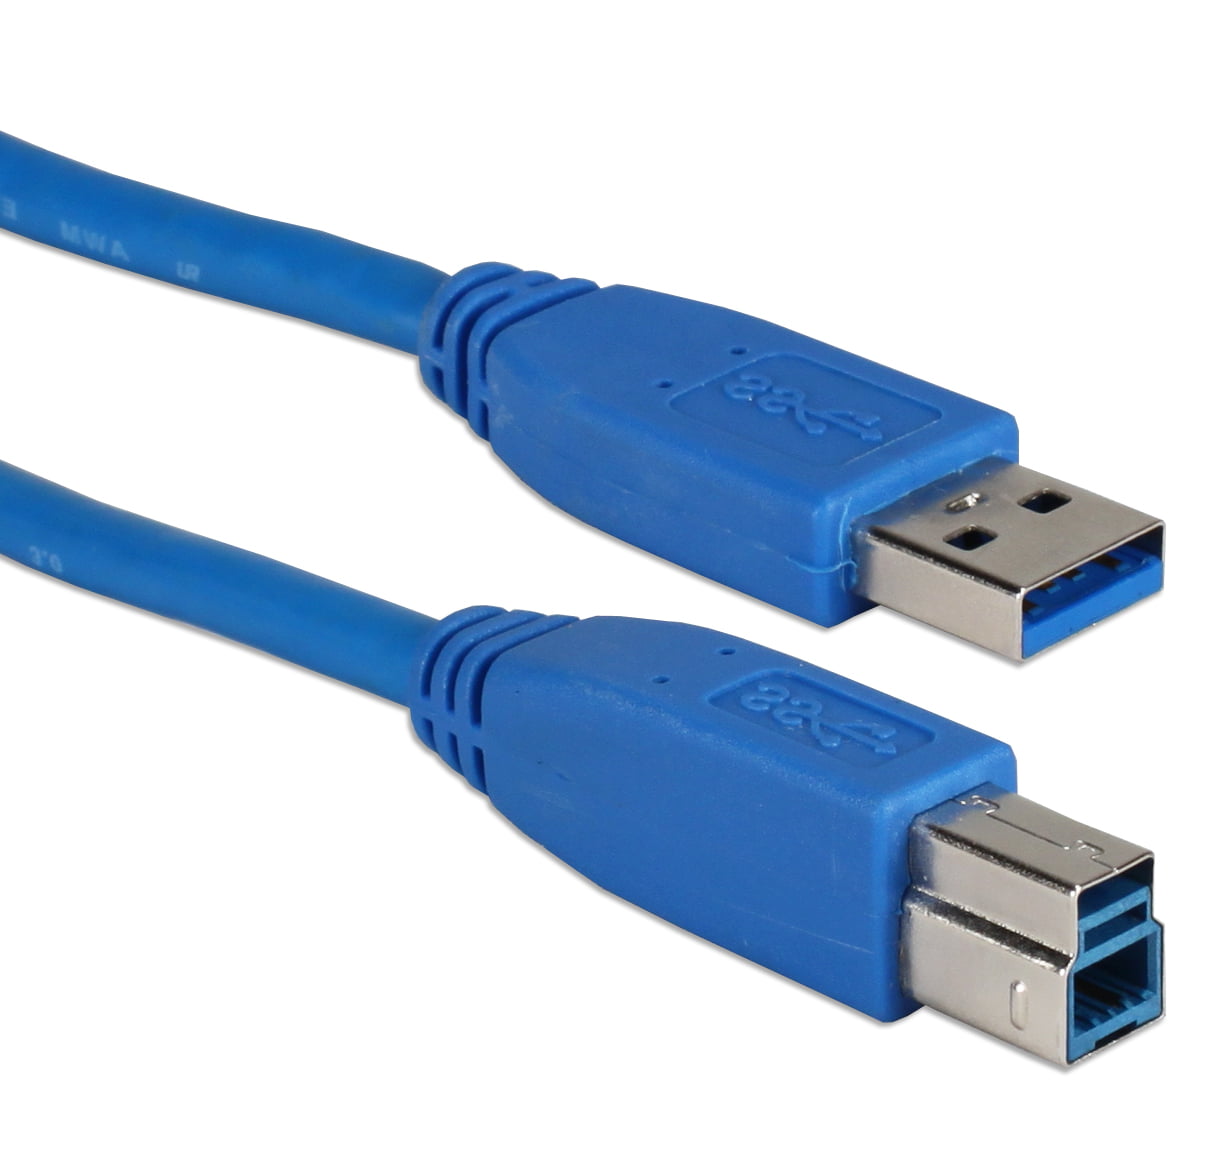 10U3-02210 USB 3.0 Printer/Device Cable 10 Foot Blue Type A Male to Type B Male 